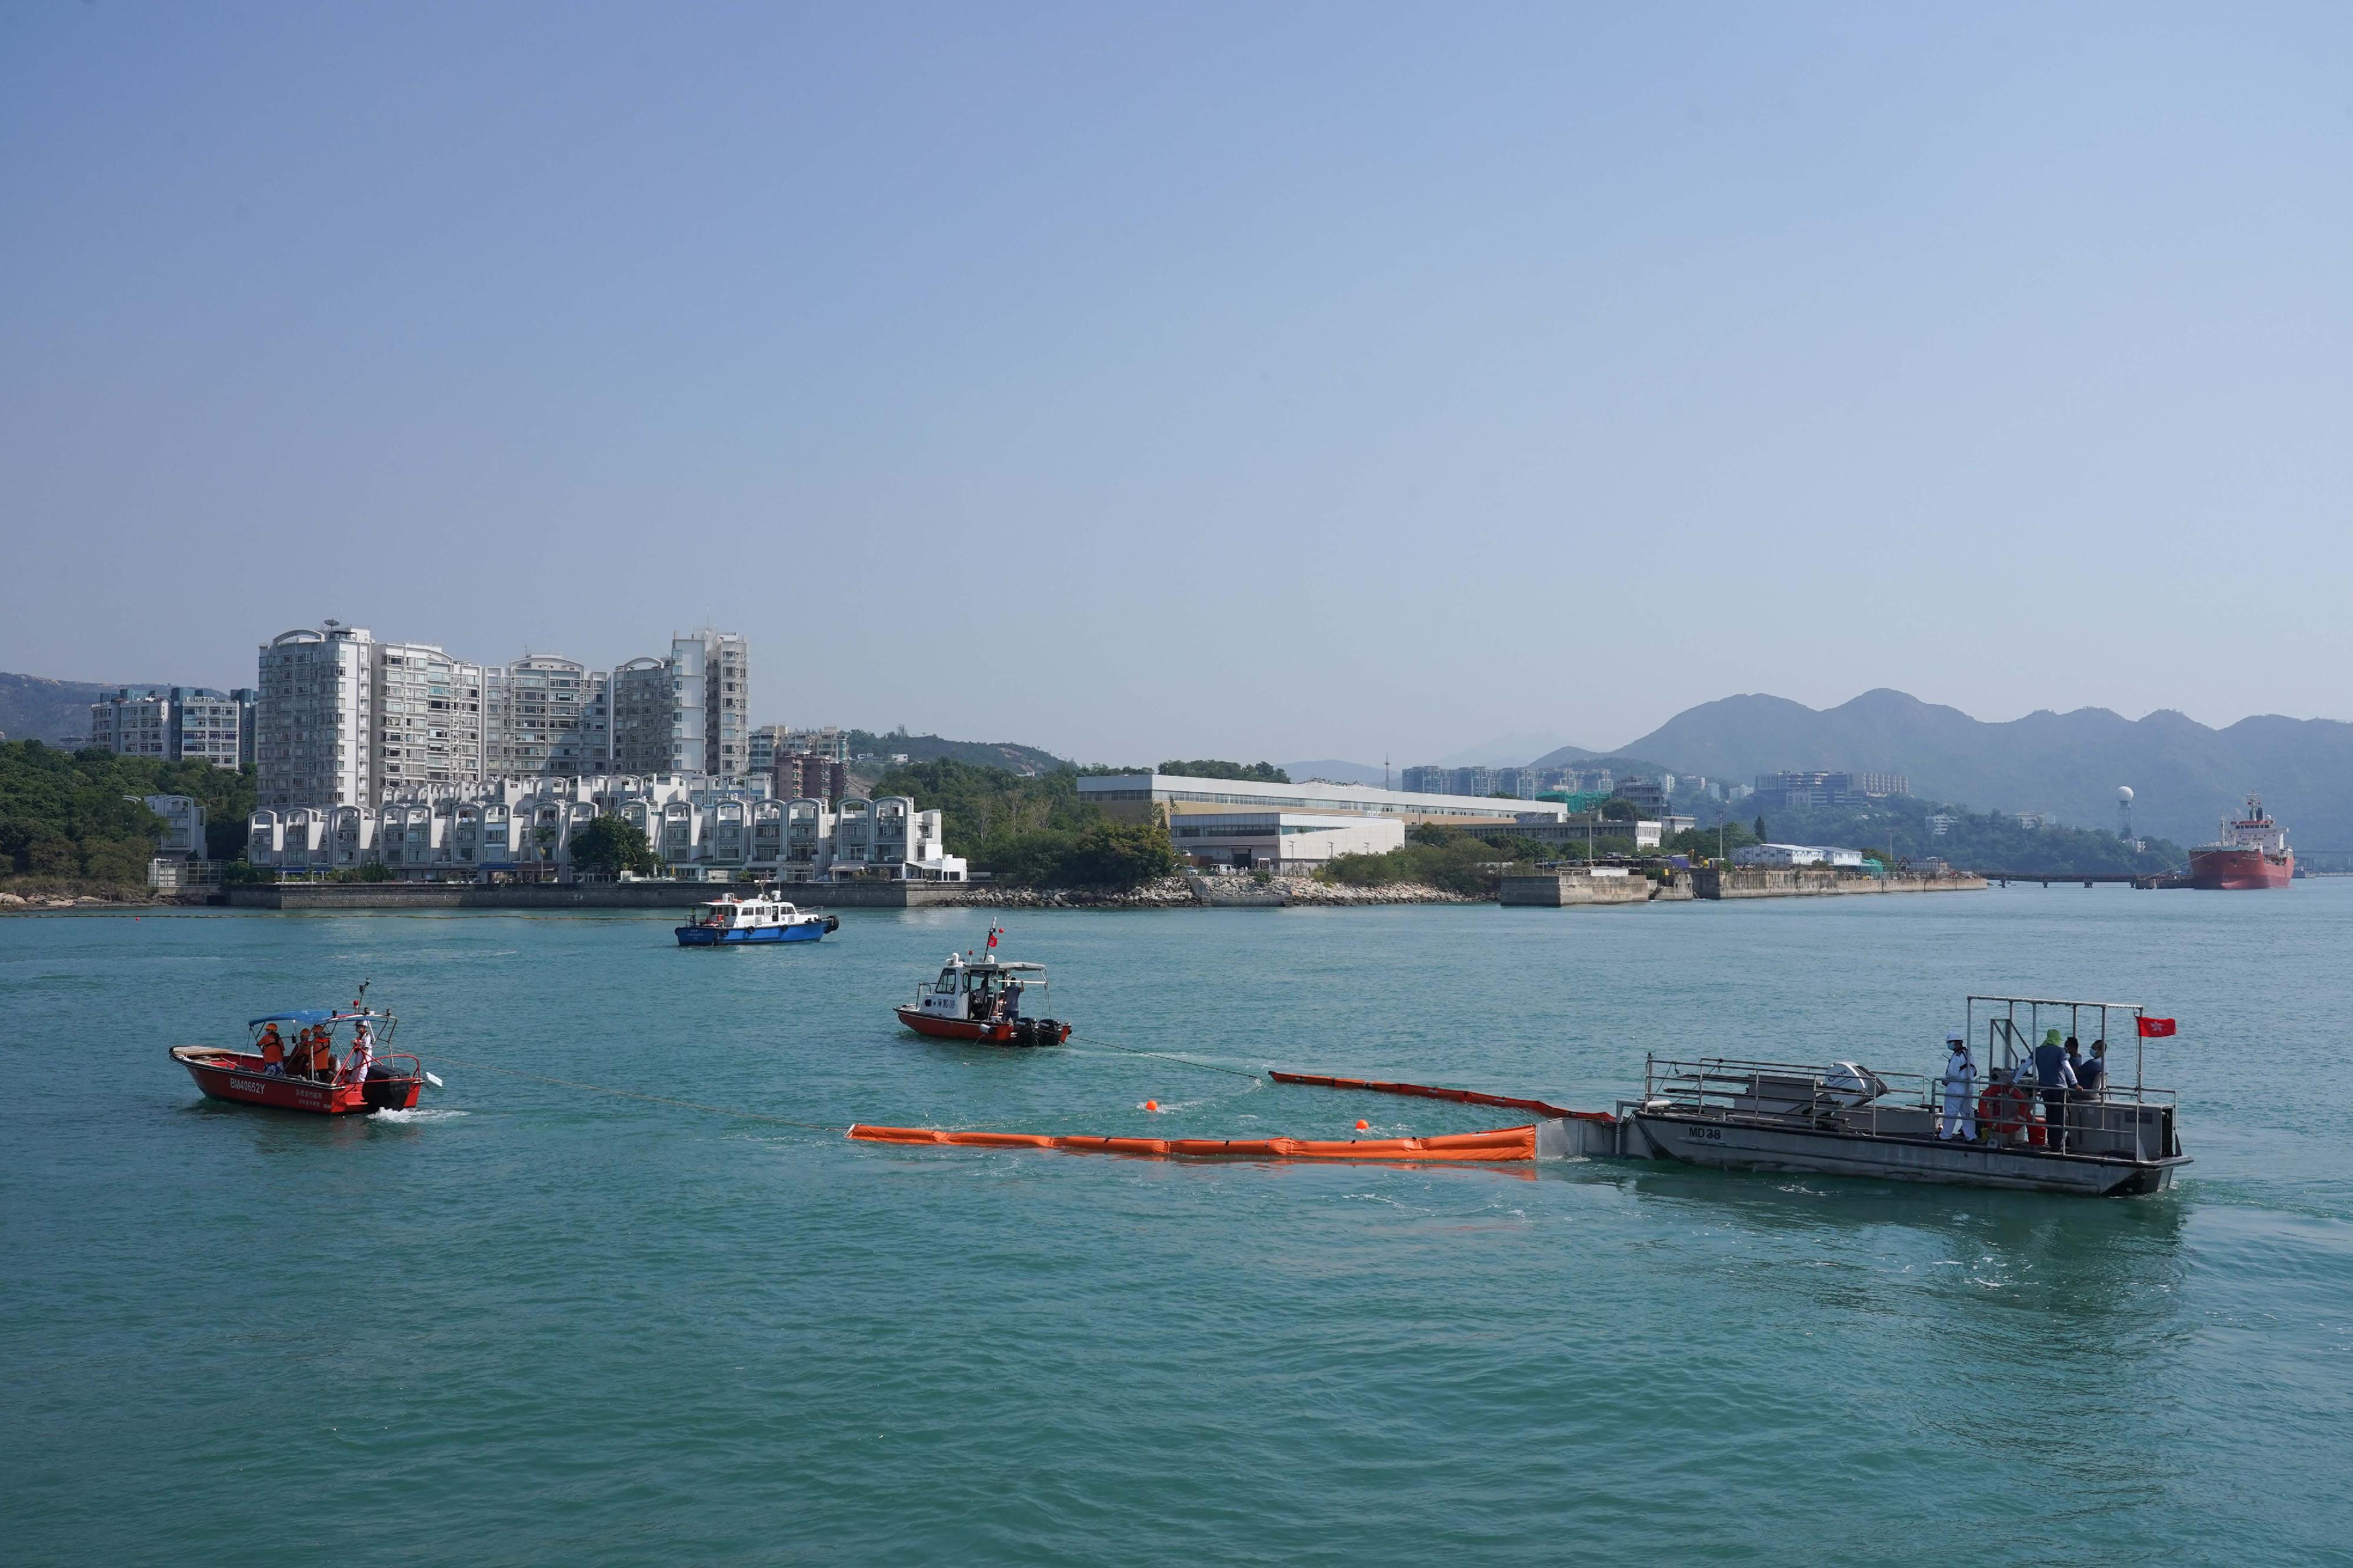 The annual marine pollution joint response exercises, code-named Oilex 2022 and Maritime Hazardous and Noxious Substances (HNS) 2022, were conducted by various government departments this morning (October 28) off Pearl Island, Tuen Mun, to test their marine pollution responses in the event of spillage of oil and HNS in Hong Kong waters. Photo shows an oil combat team deploying floating booms and setting up barrier booms to prevent the spill from spreading.